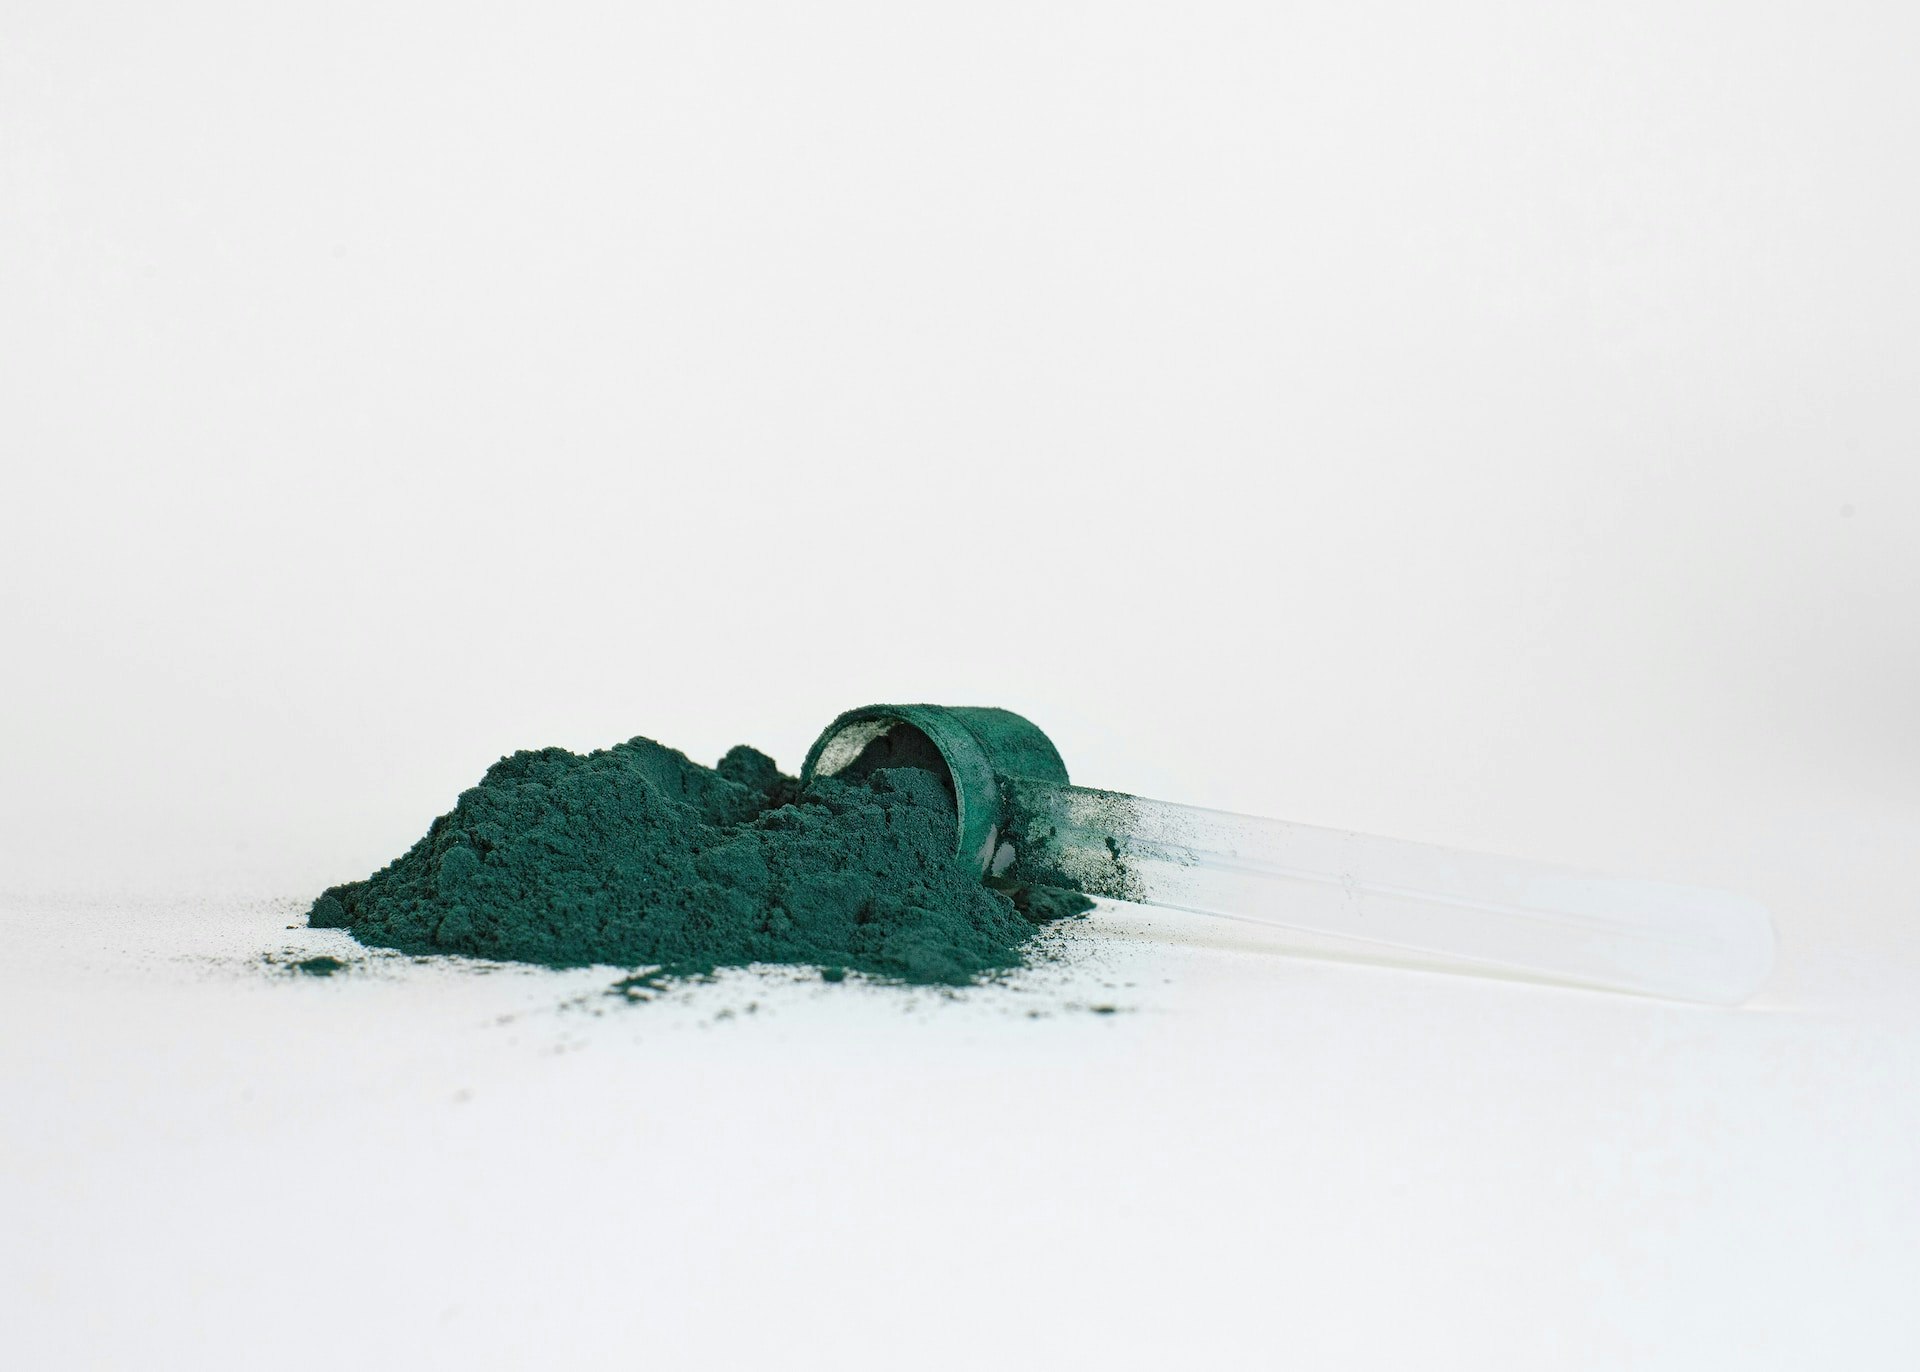 Blue vs Green Spirulina: What's the Difference?